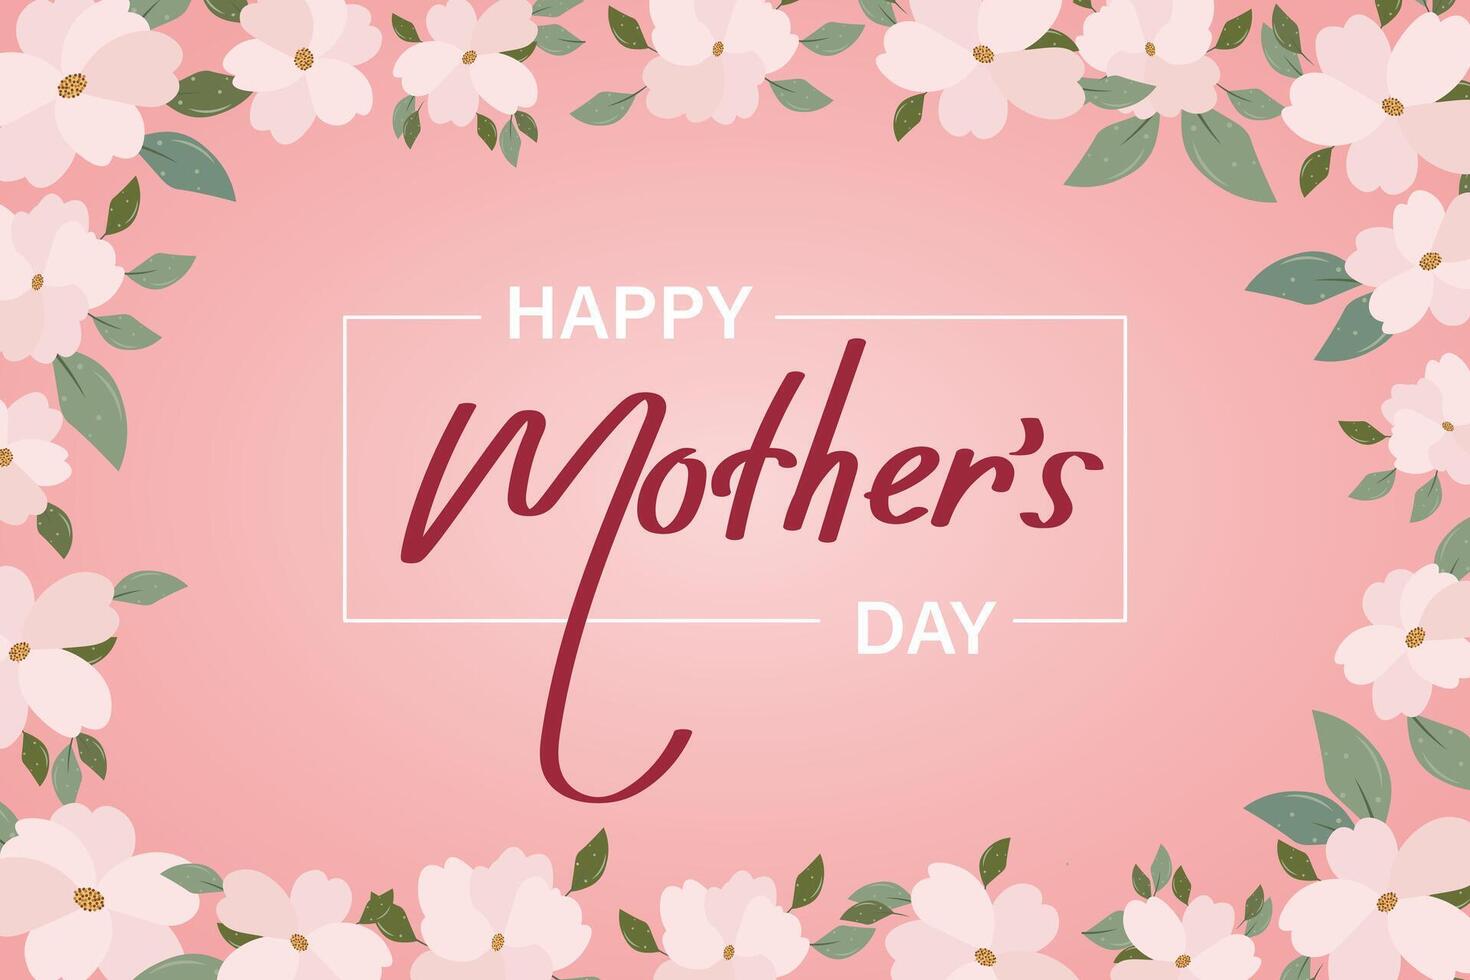 Mothers day banner with cherry blossom flowers, greeting card template, illustration with hand drawn lettering. Vector